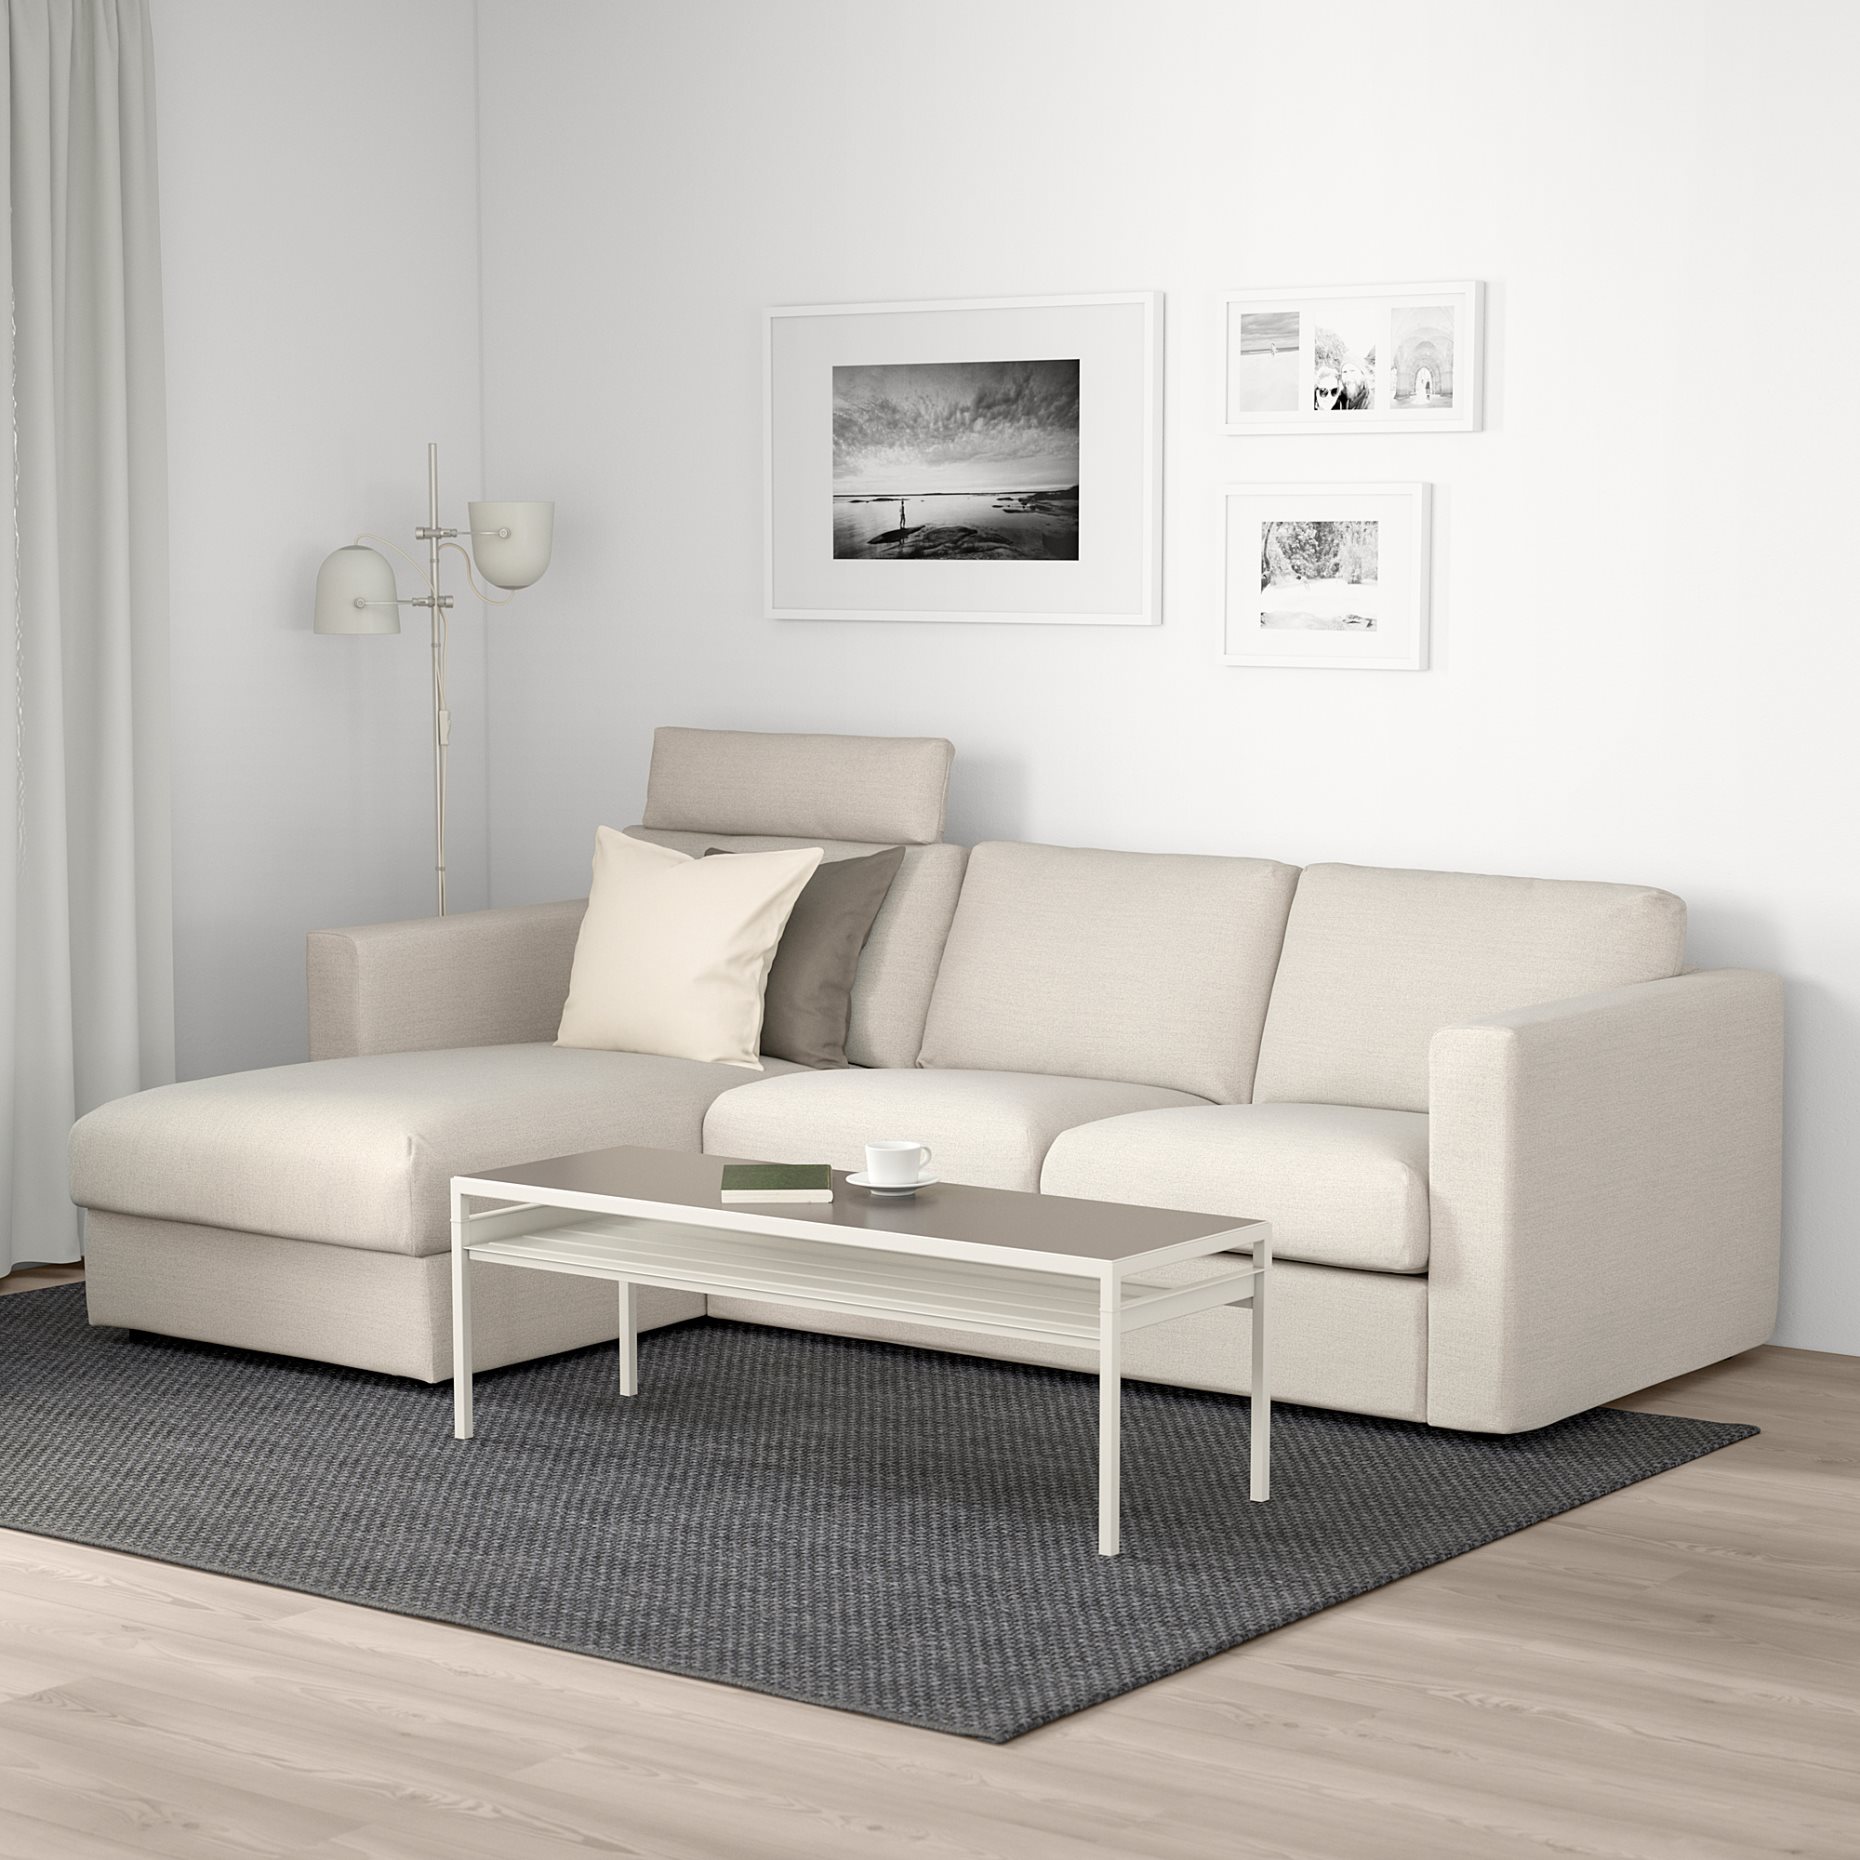 VIMLE, 3-seat sofa with chaise longue with headrest, 293.991.03